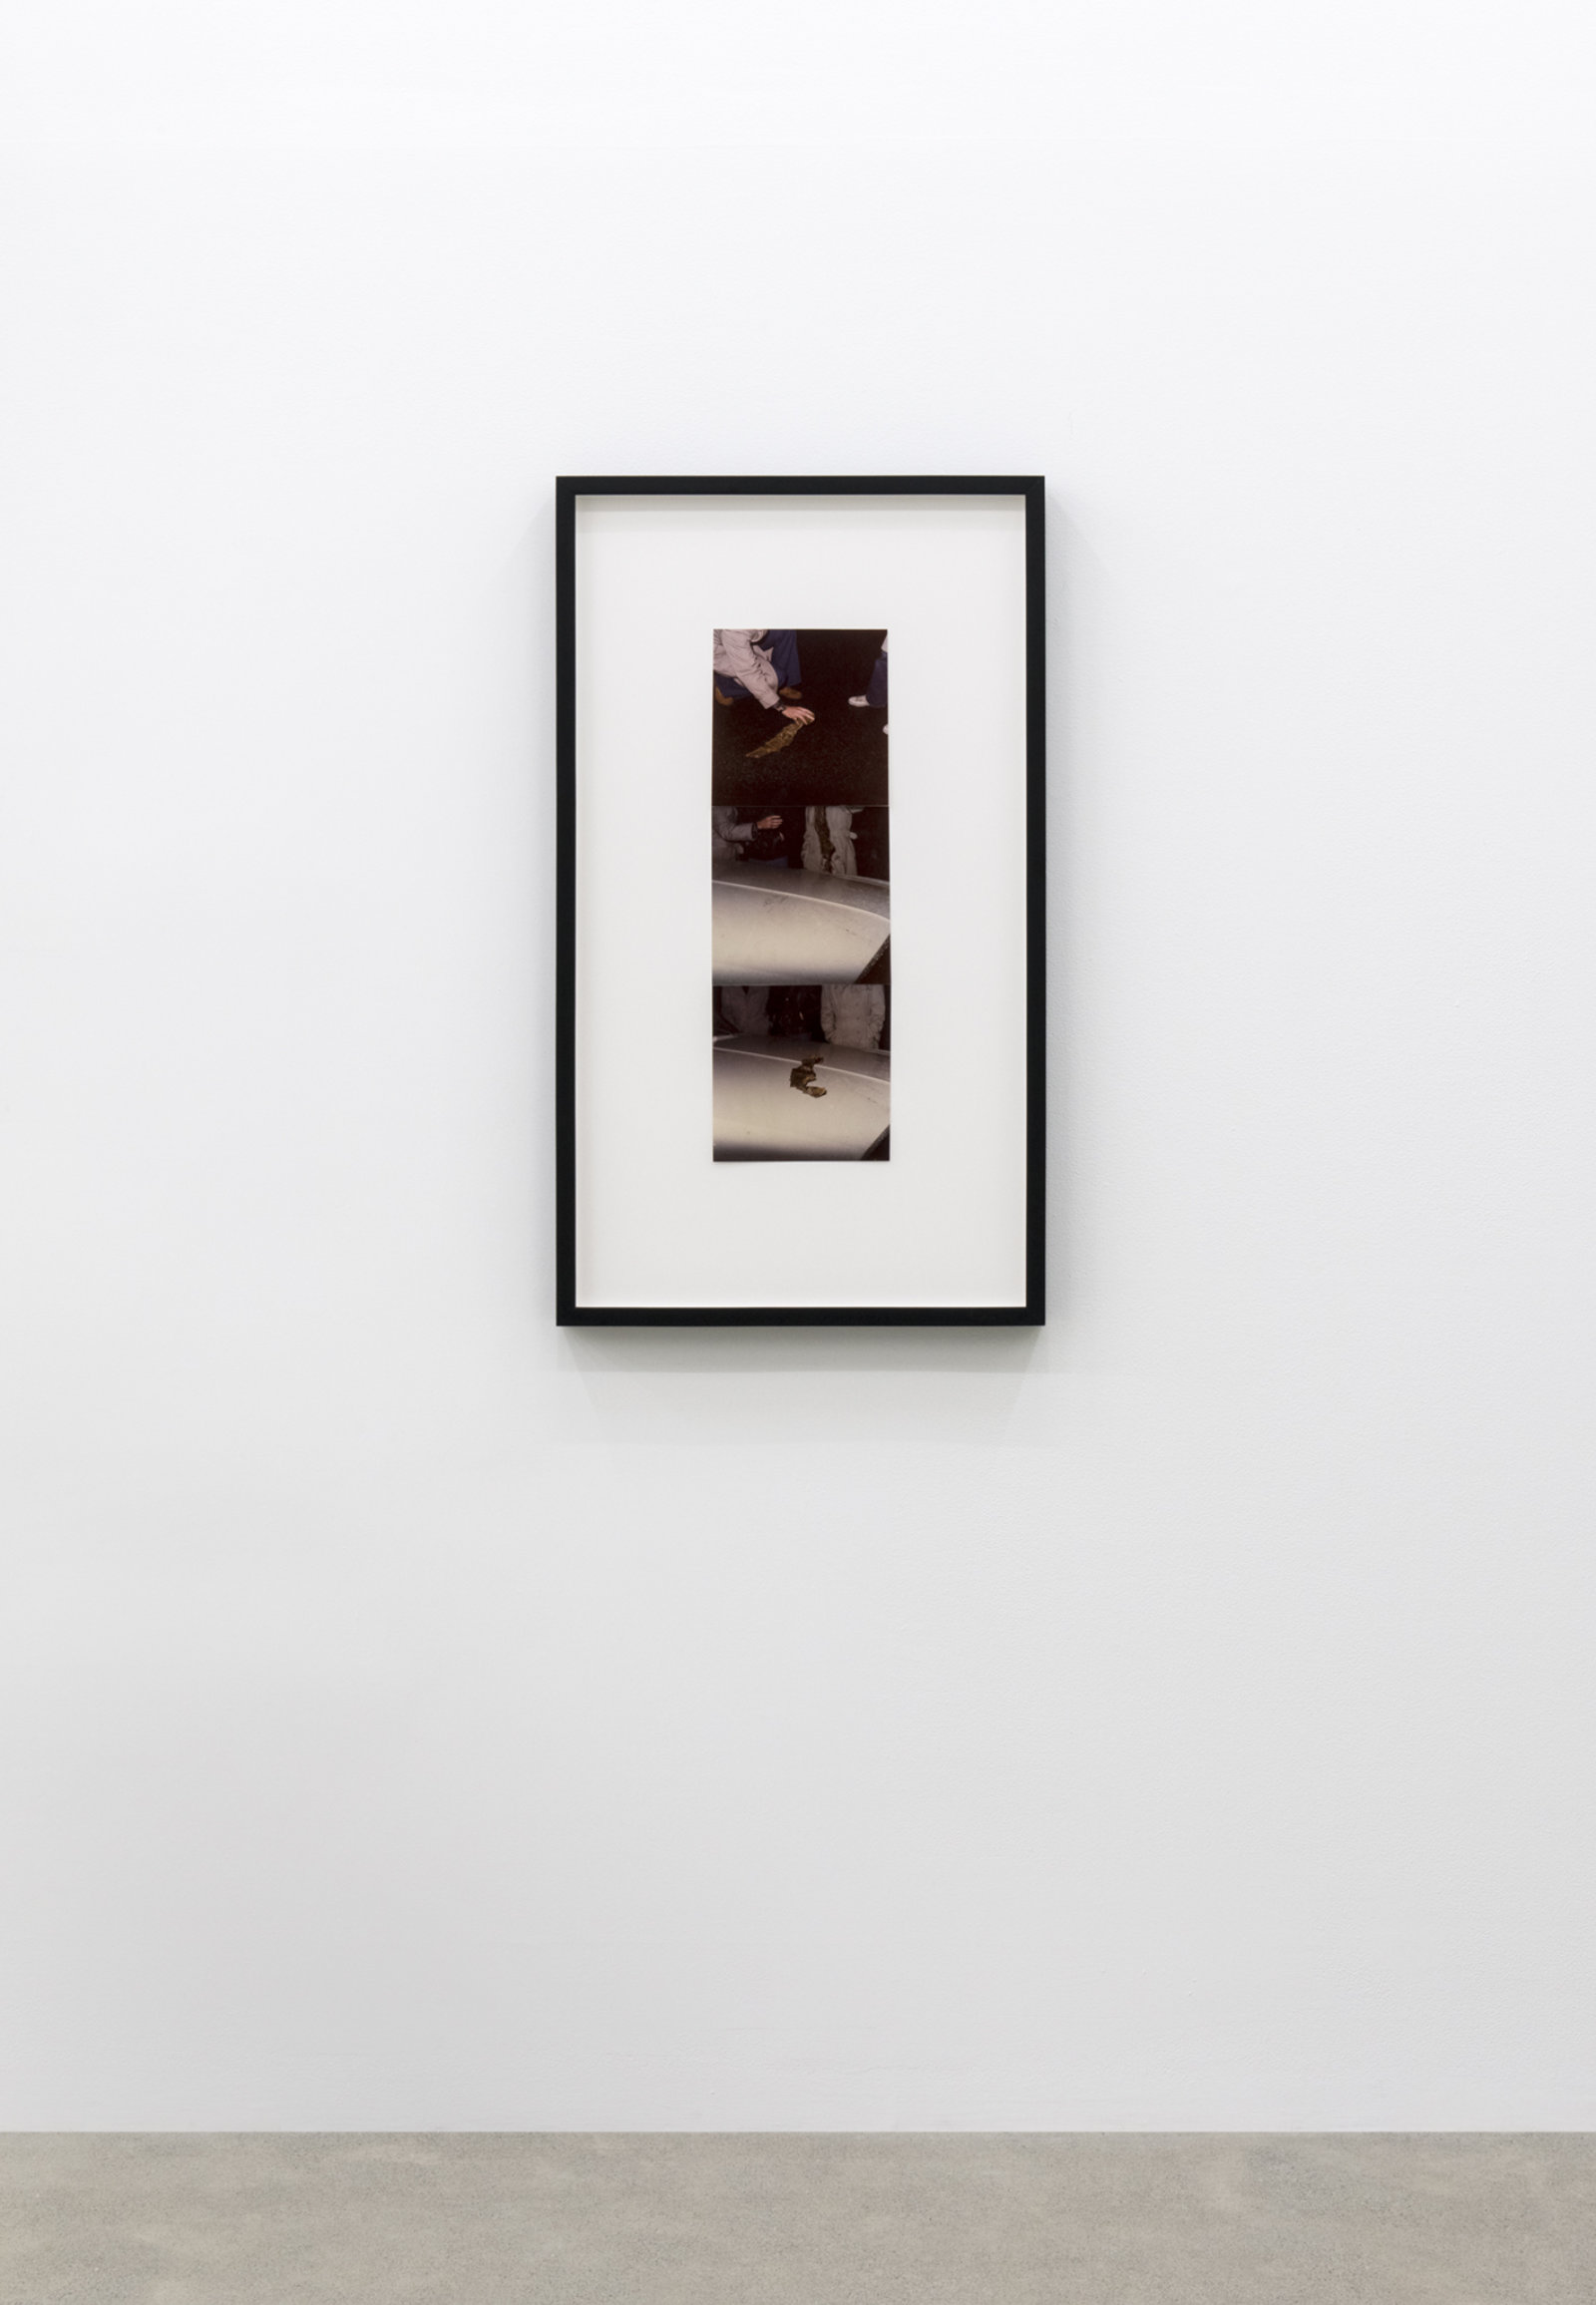 Ian Wallace, Found Object, 1977, 3 colour photographs, 37 x 21 in. (94 x 53 cm)